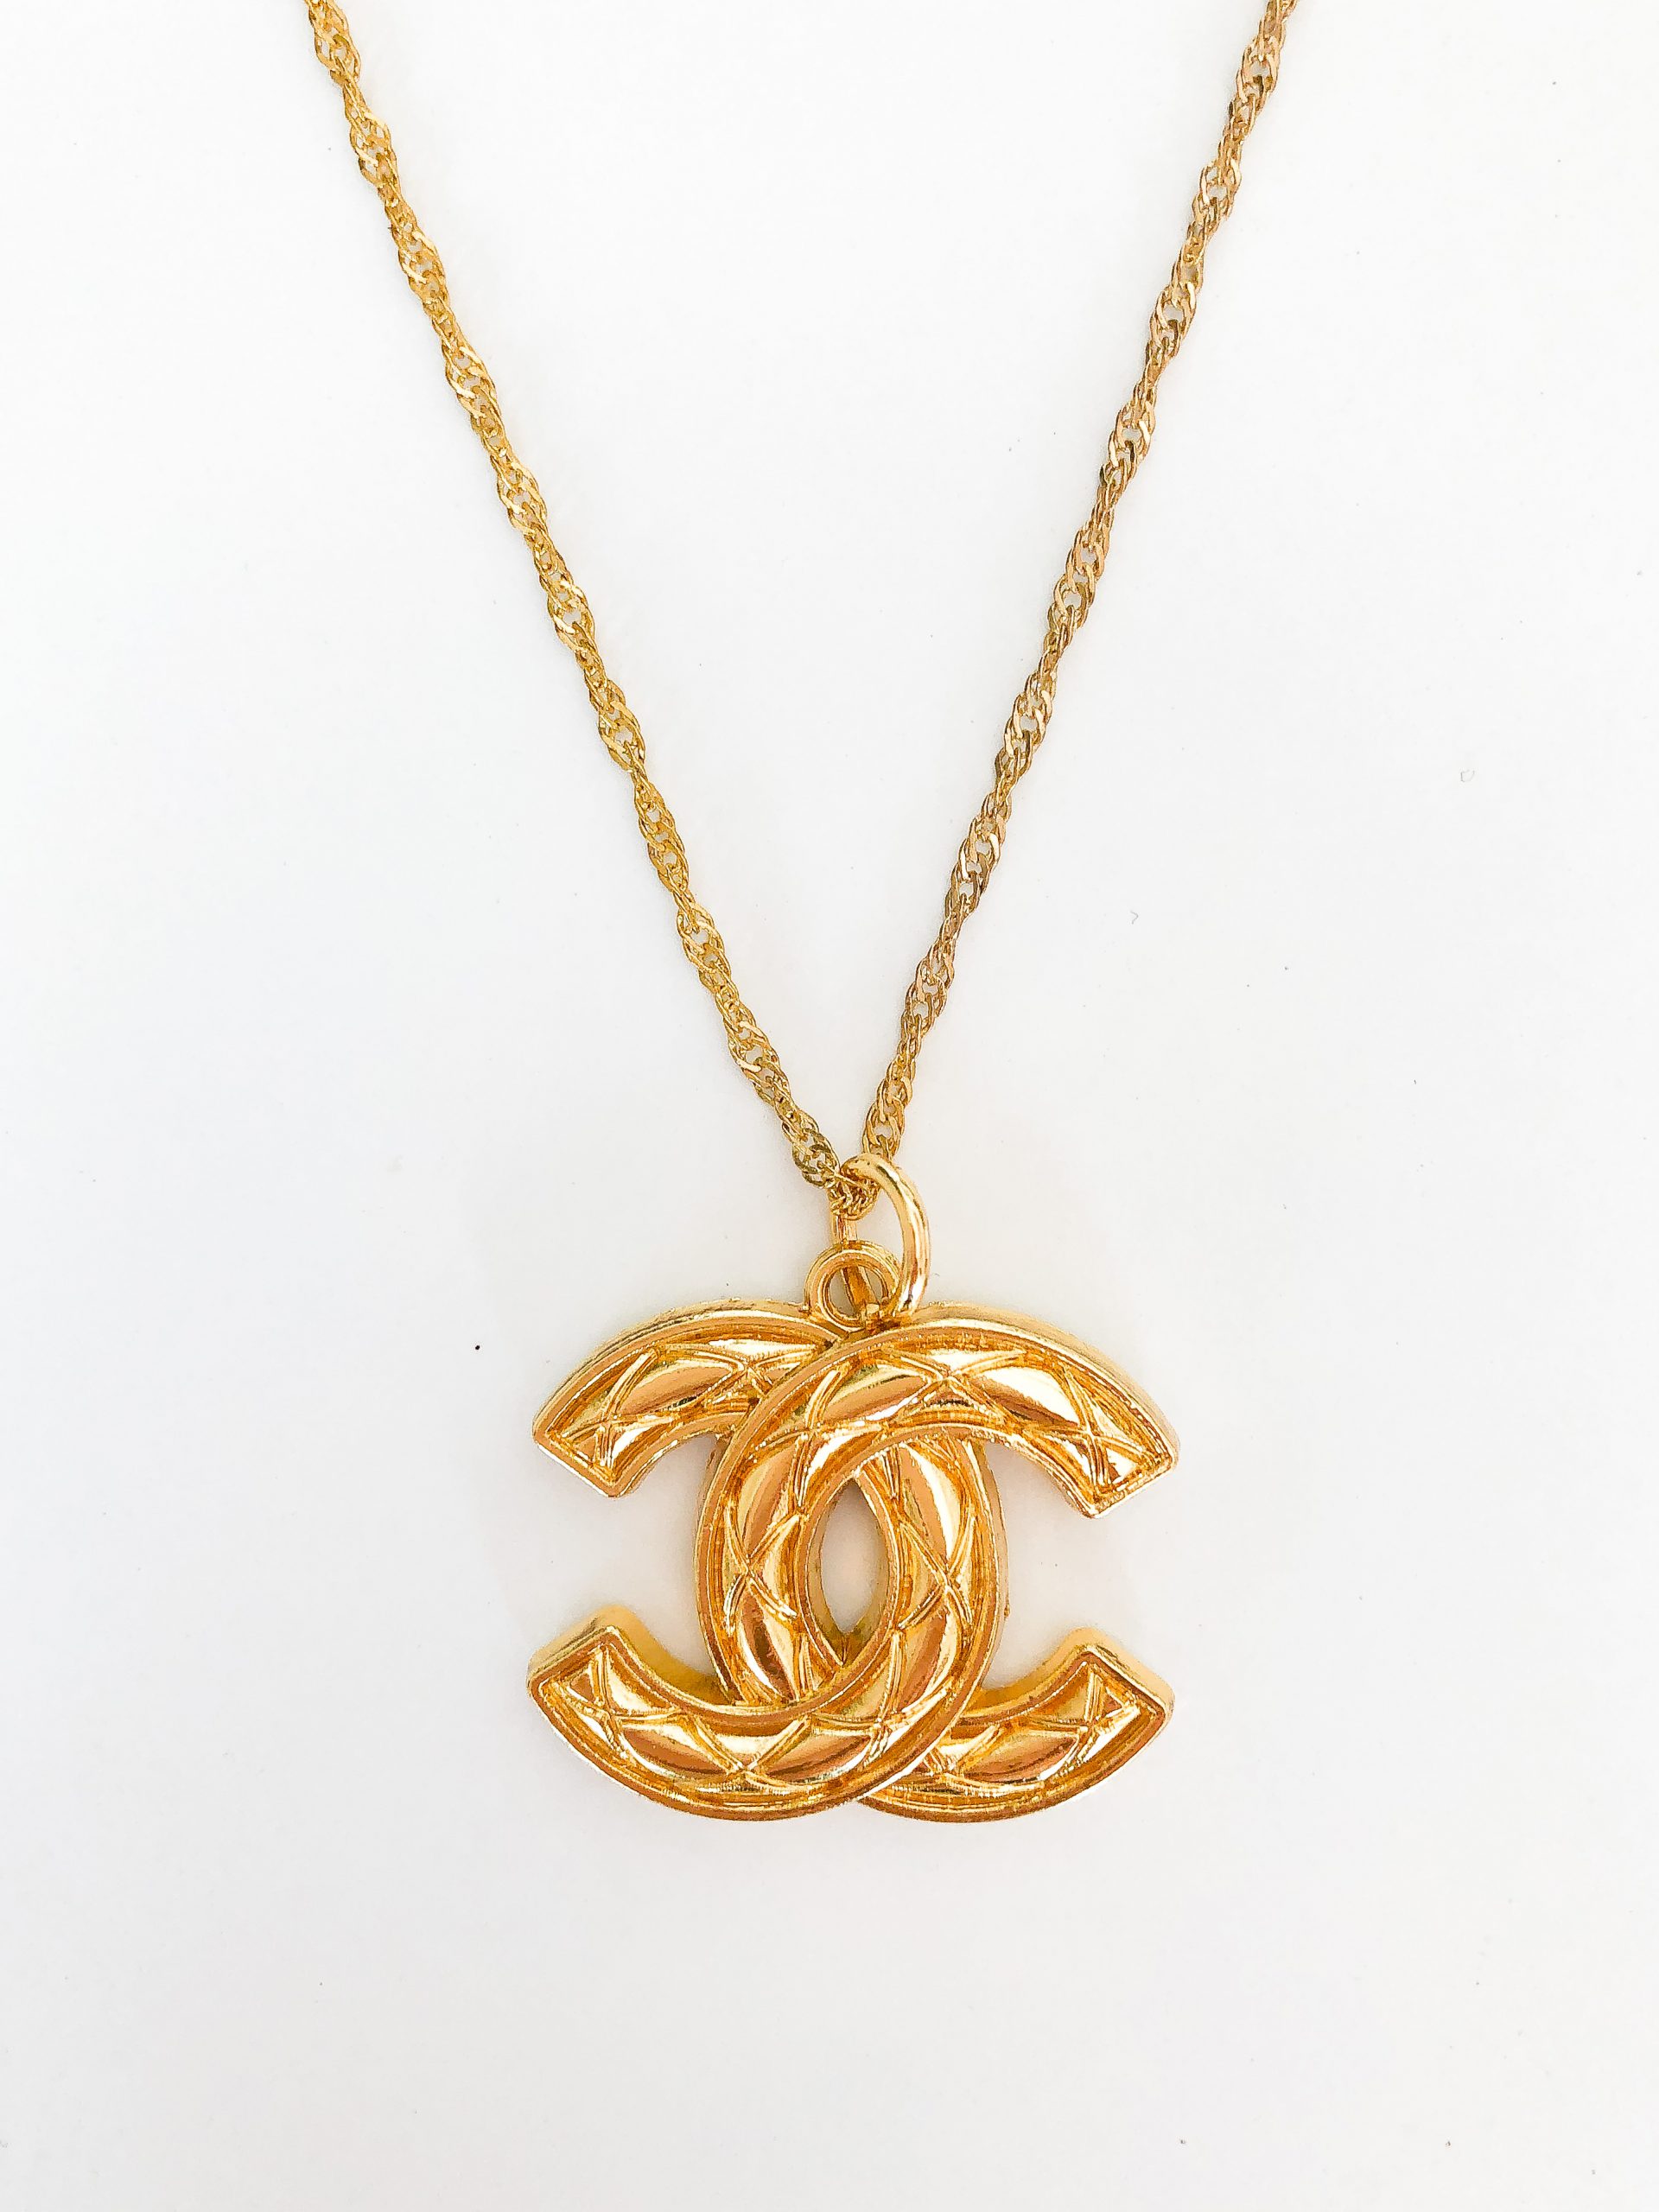 Chanel Circle CC Logo Necklace with Pink Crystals | Consign of the Times ™